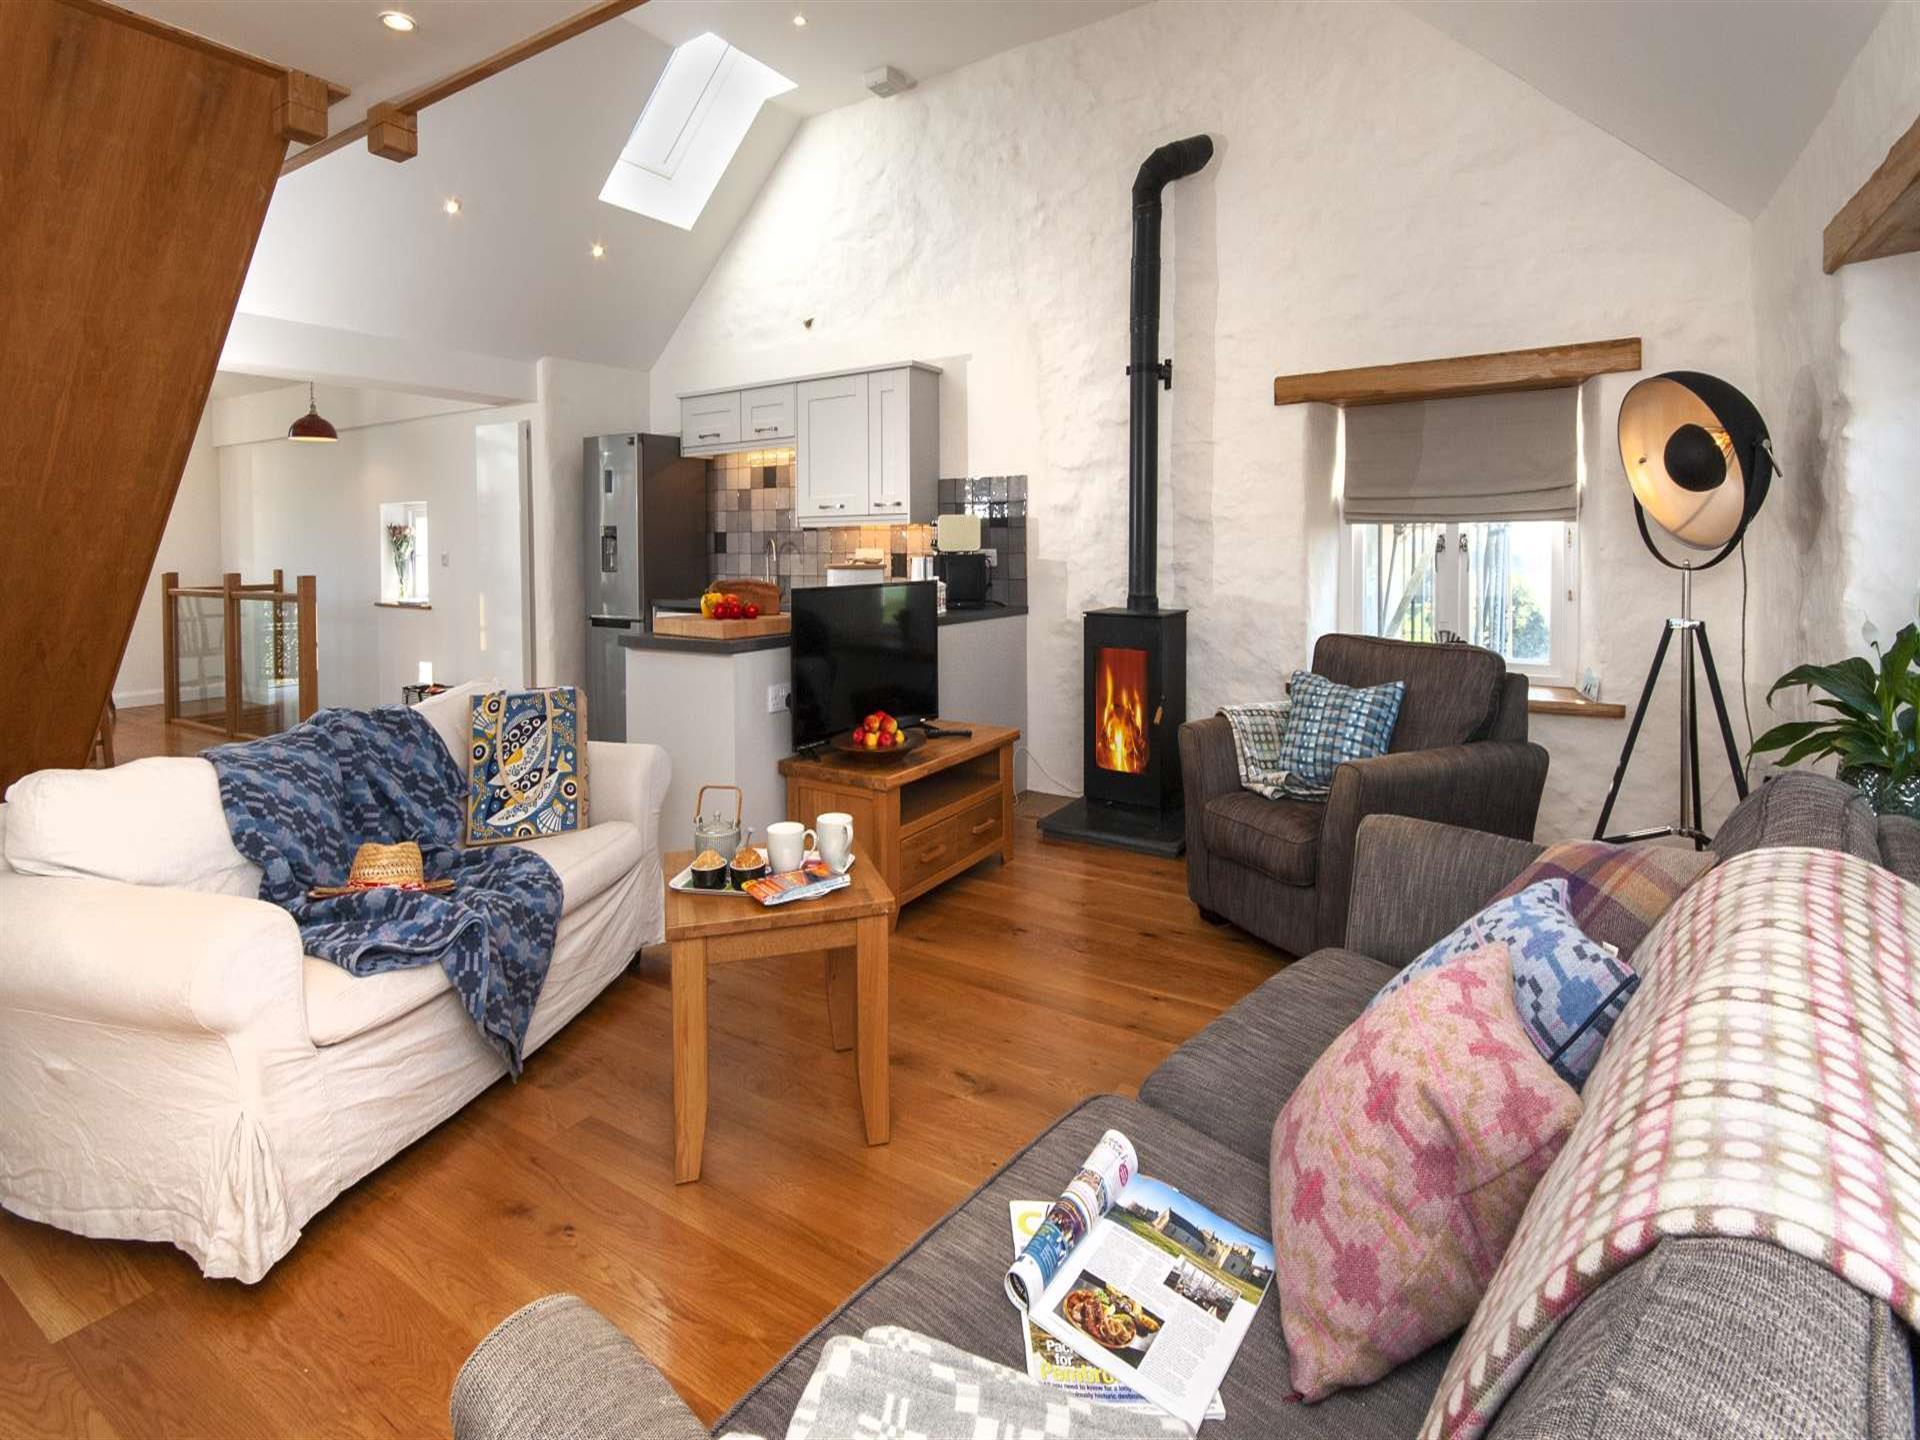 Porthgain holiday accommodation with spacious open